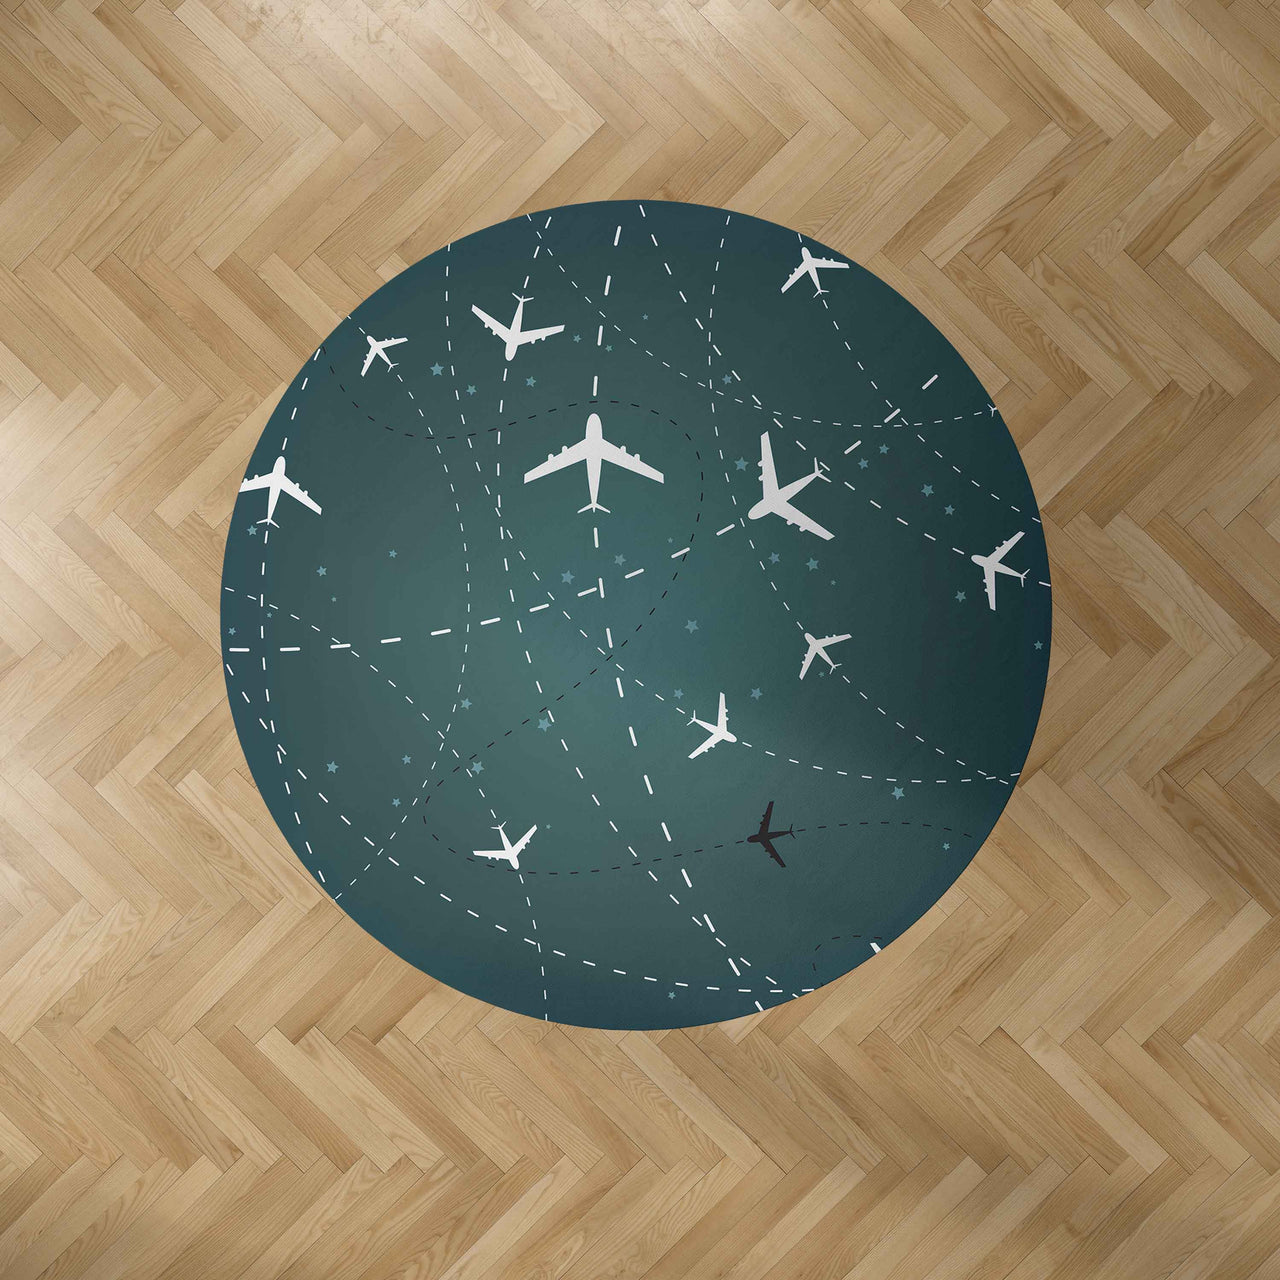 Travelling with Aircraft (Green) Carpet & Floor Mats (Round)